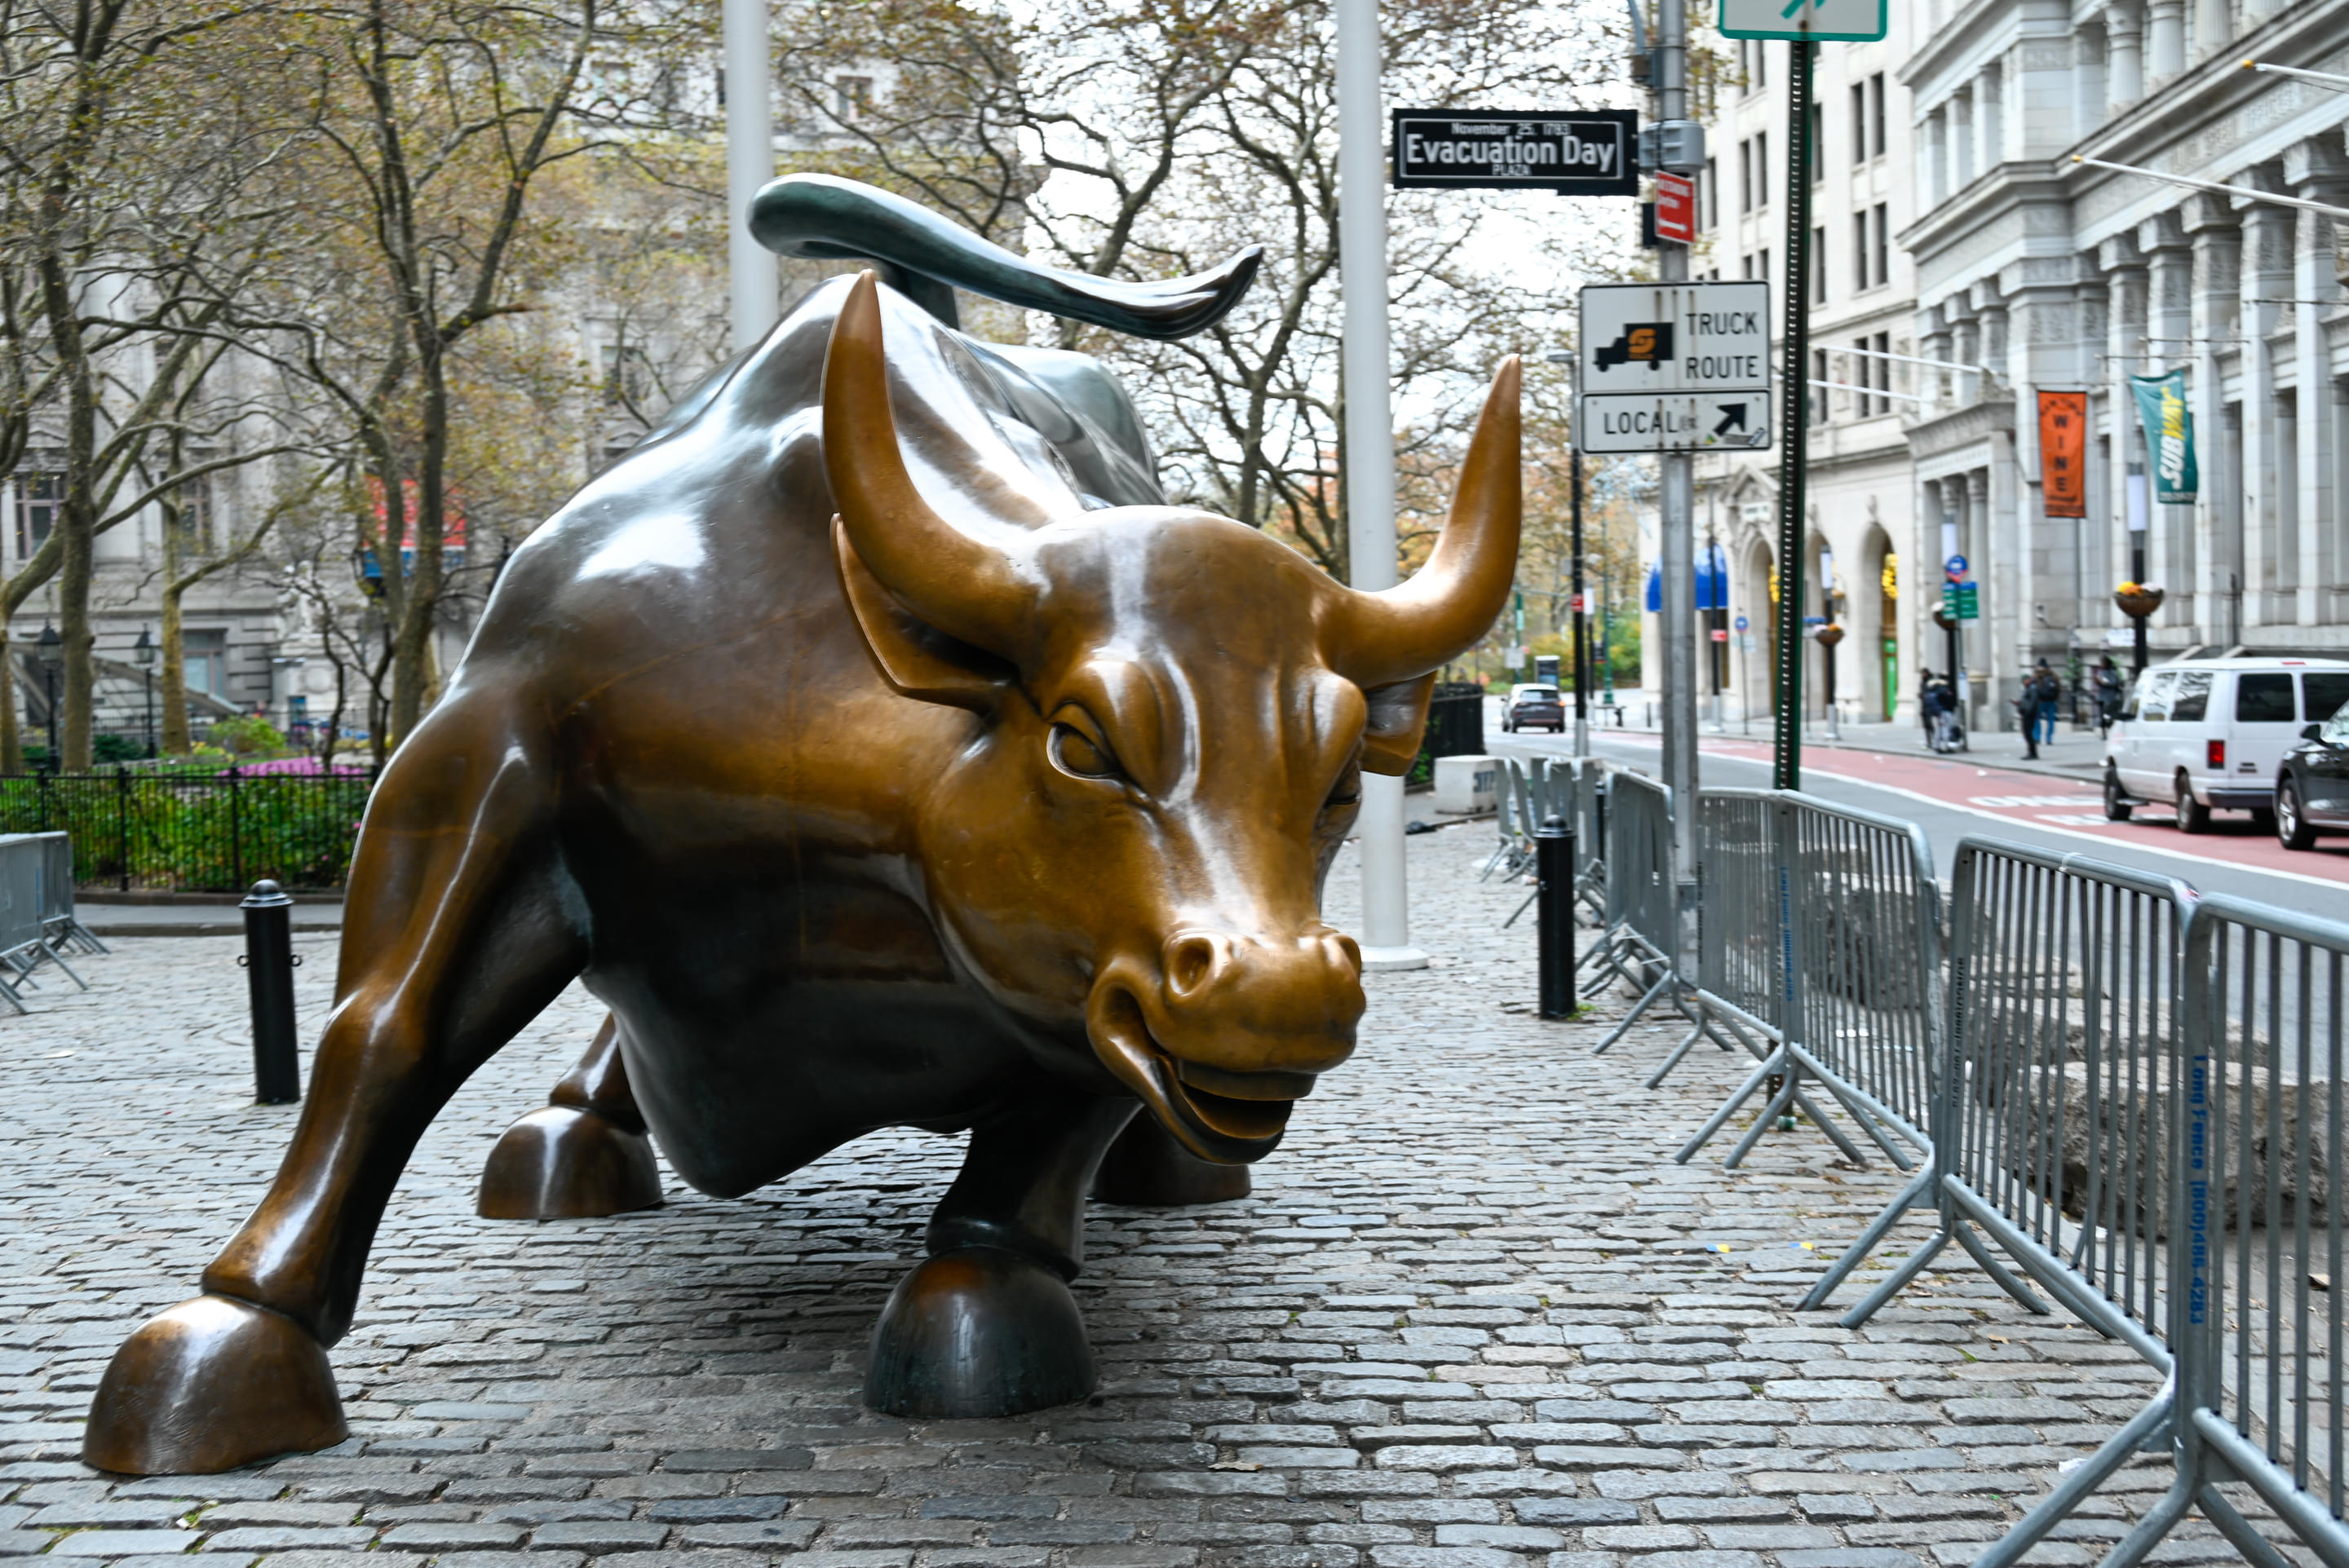 Charging Bull Overview